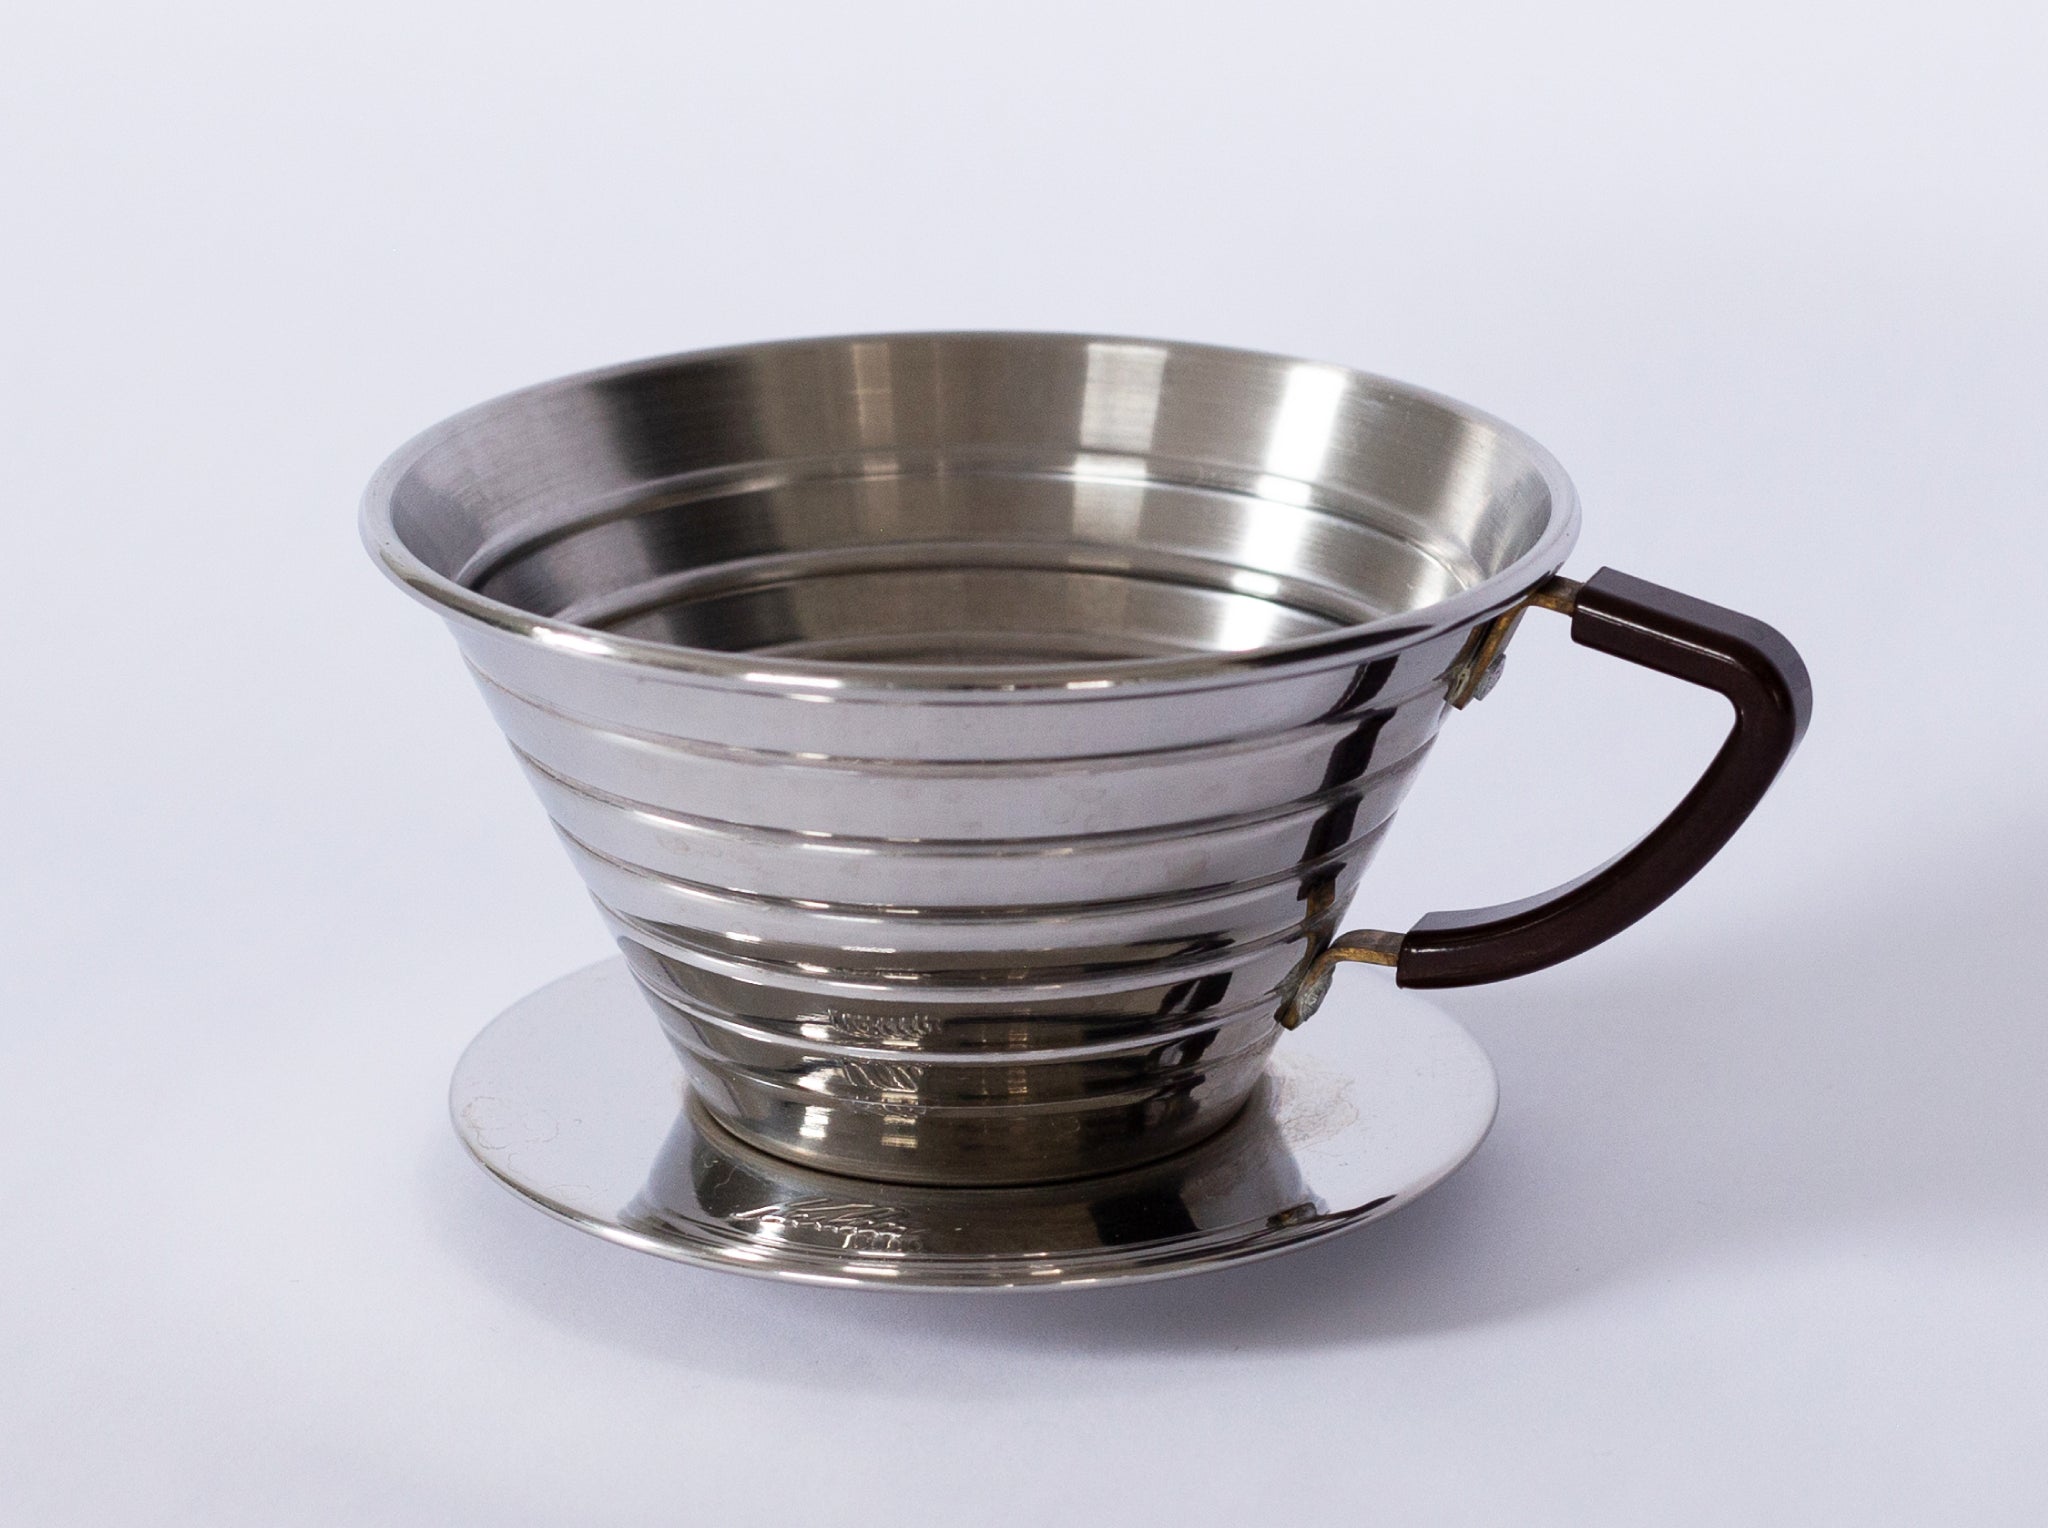 A steel coffee brewer on a white background